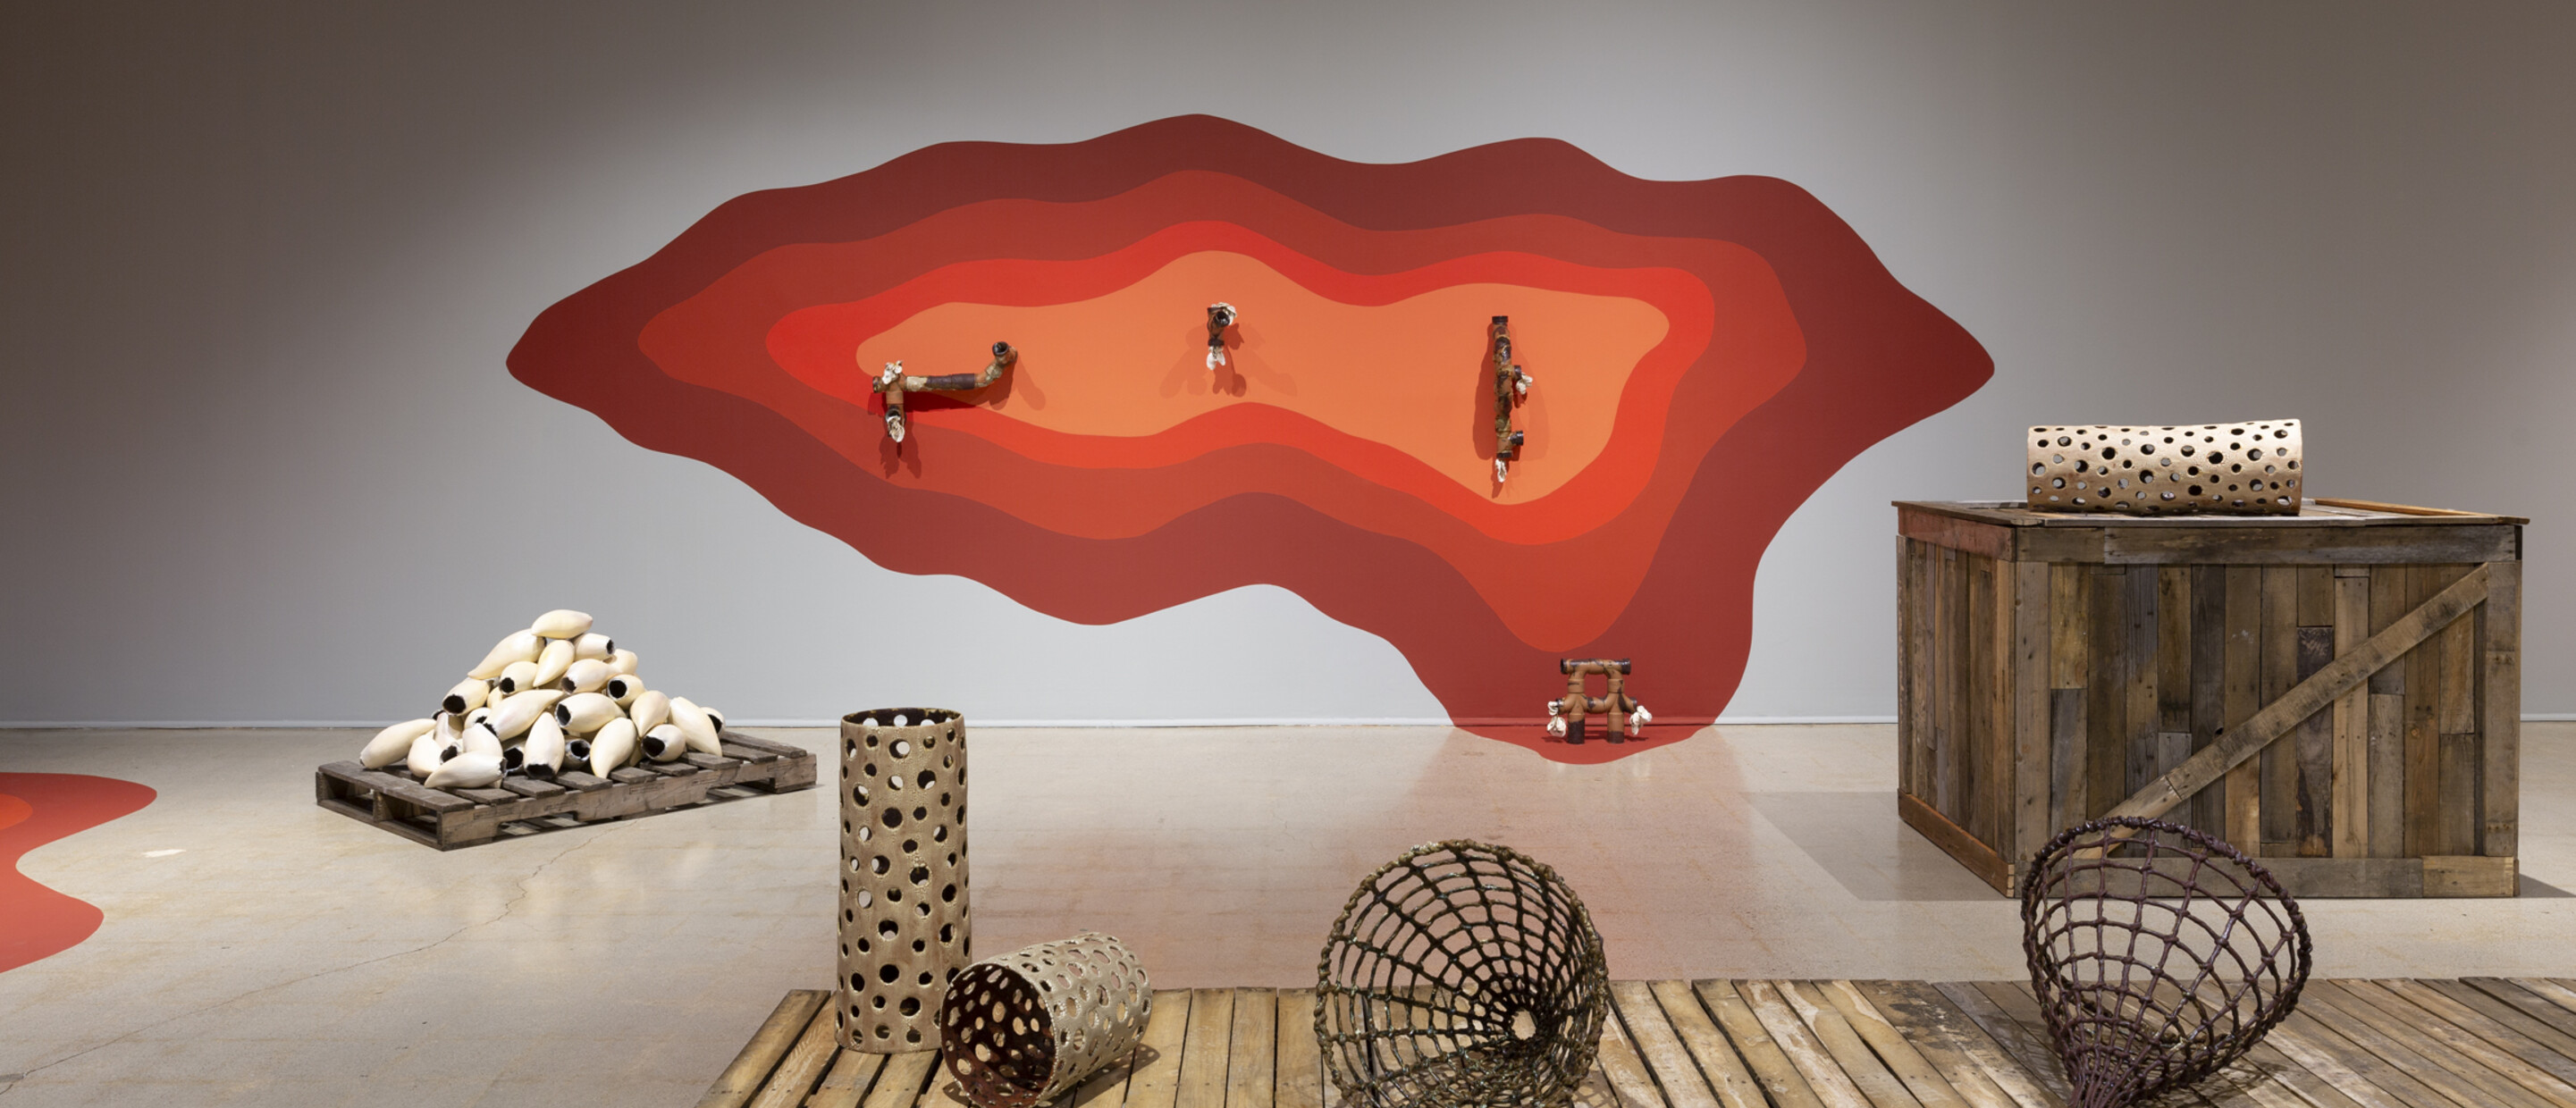 Installation view of Courtney Leonard's exhibition with sculpture and paintings